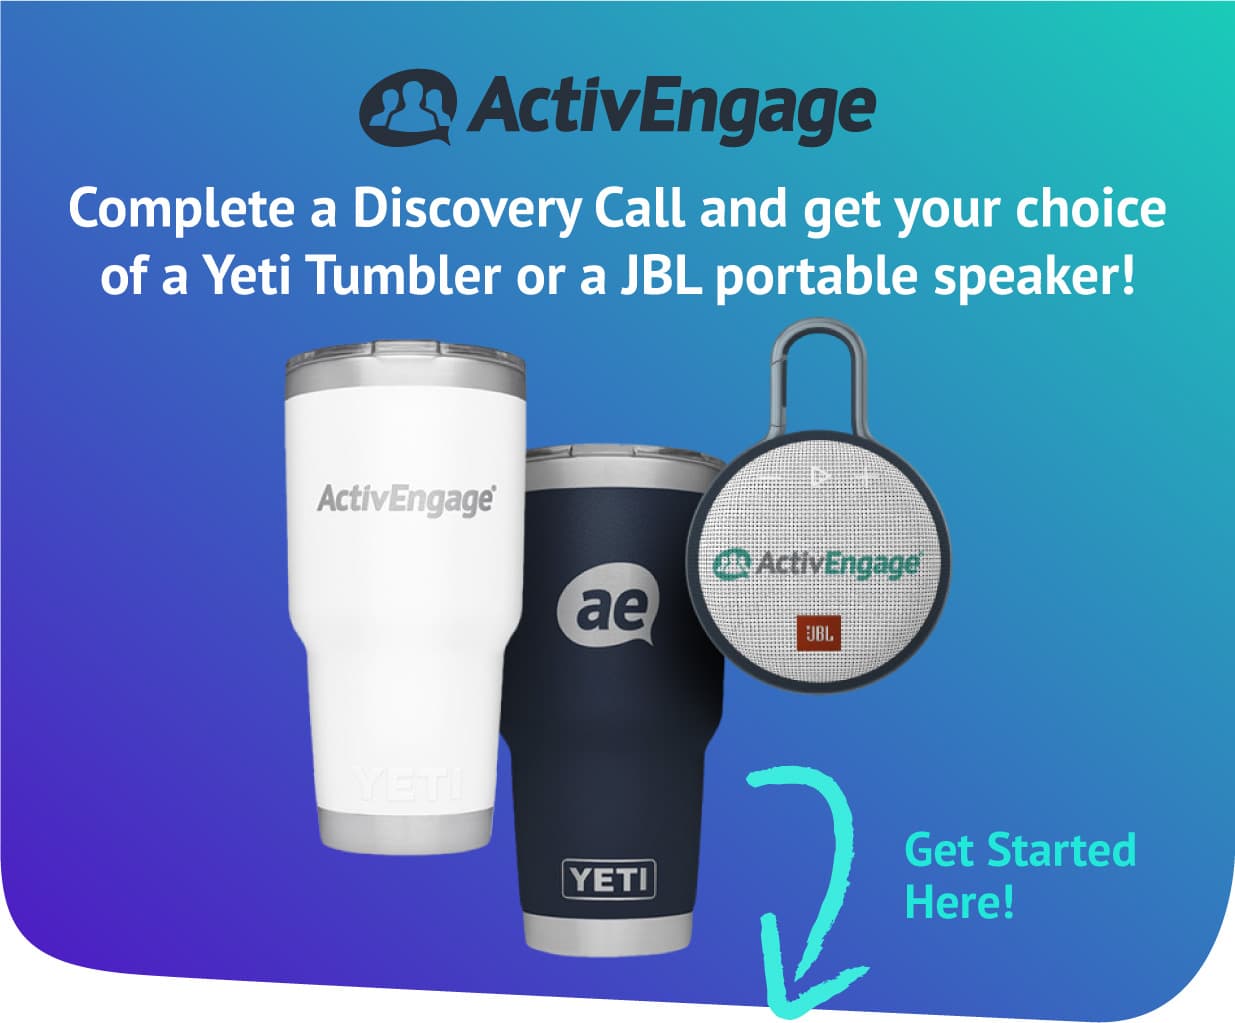 Complete a Discovery Call and get your choice of a Yeti Tumbler or a JBL portable speaker!